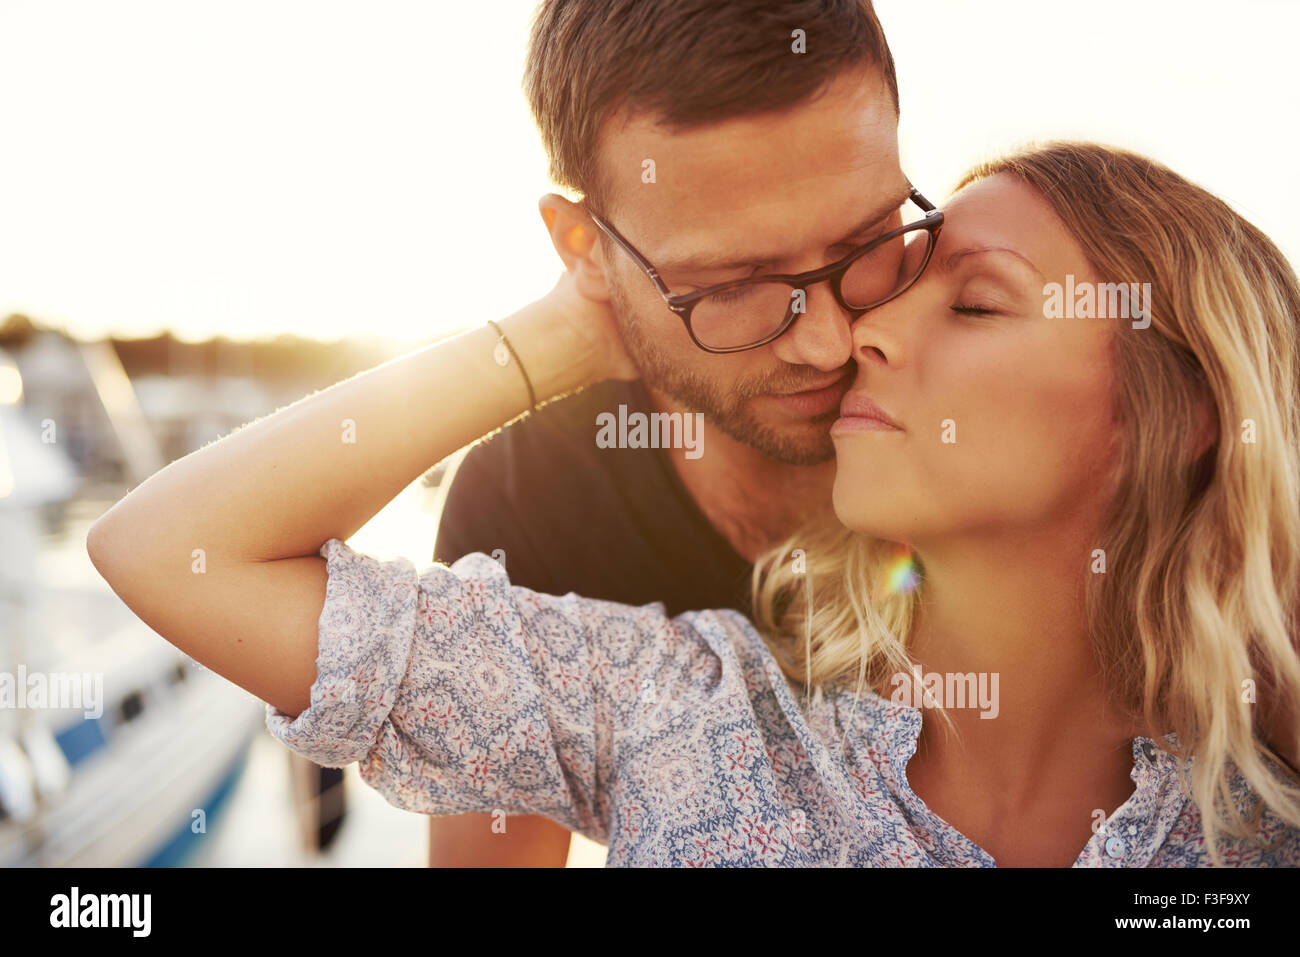 Couple Kissing On A Summer Evening, Blonde Woman and Man with Glasses Stock Photo